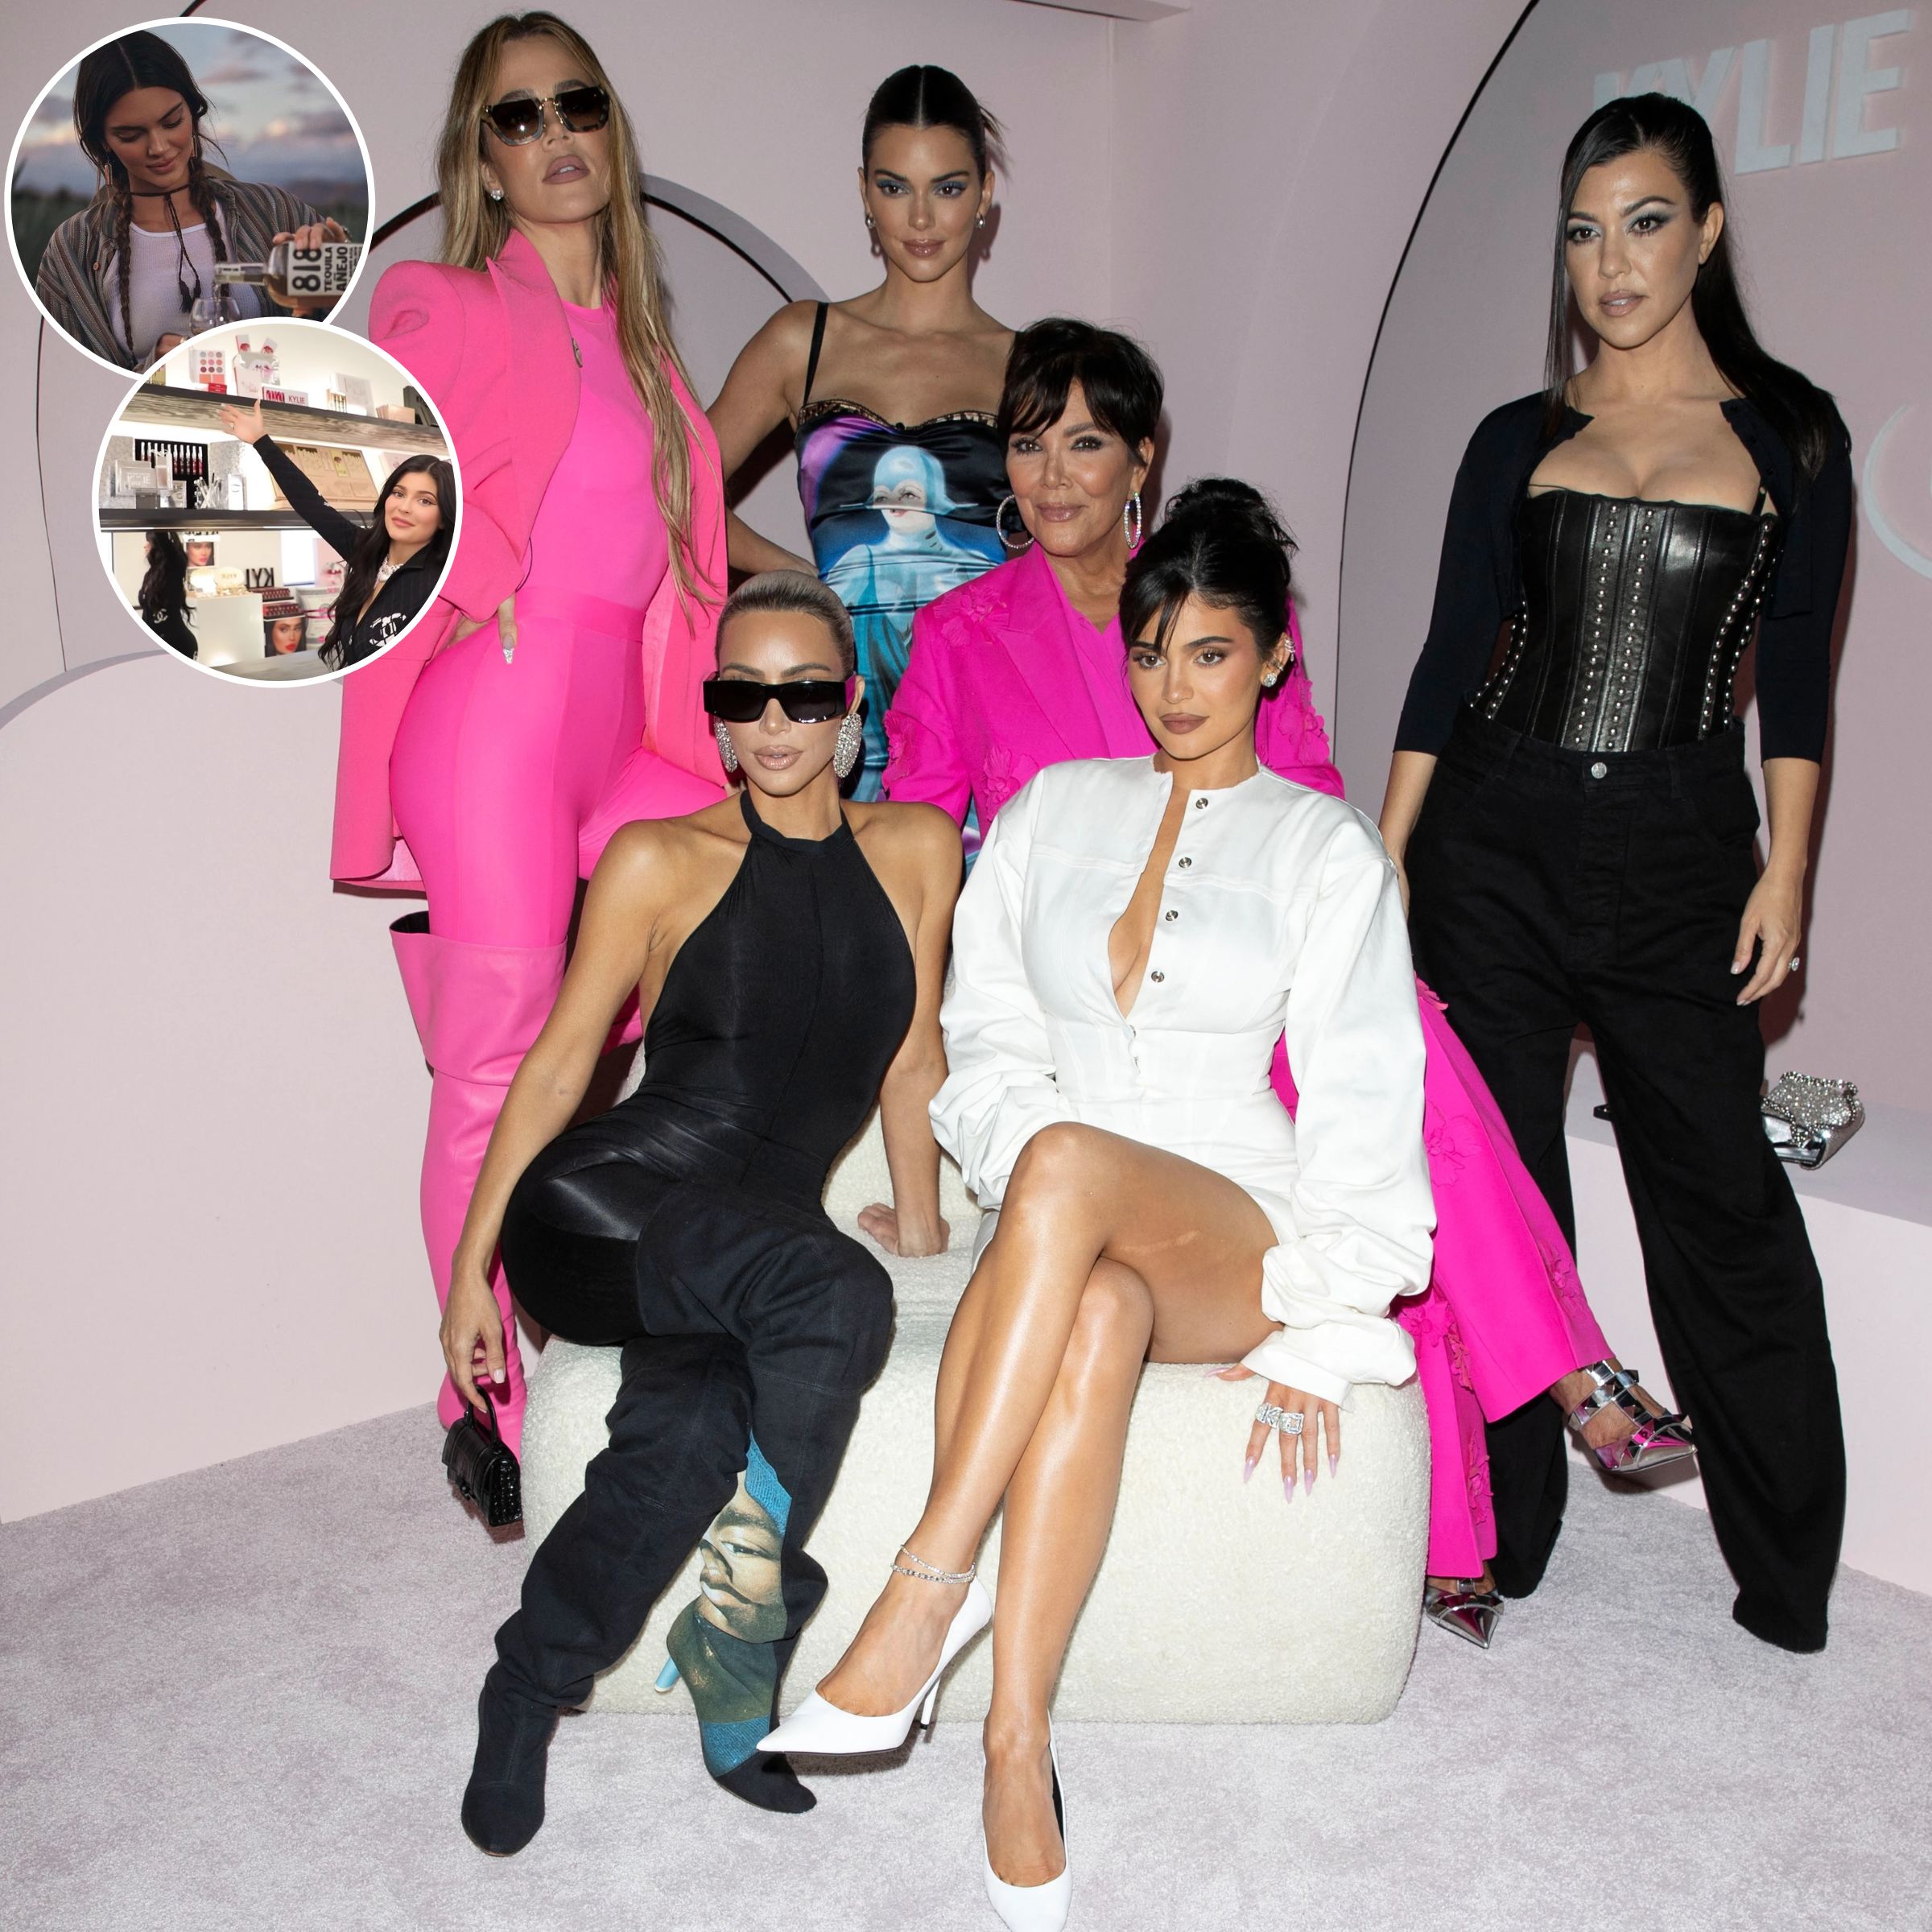 Kris Jenner's Cleaning Brand Safely Expands Into Scented Air